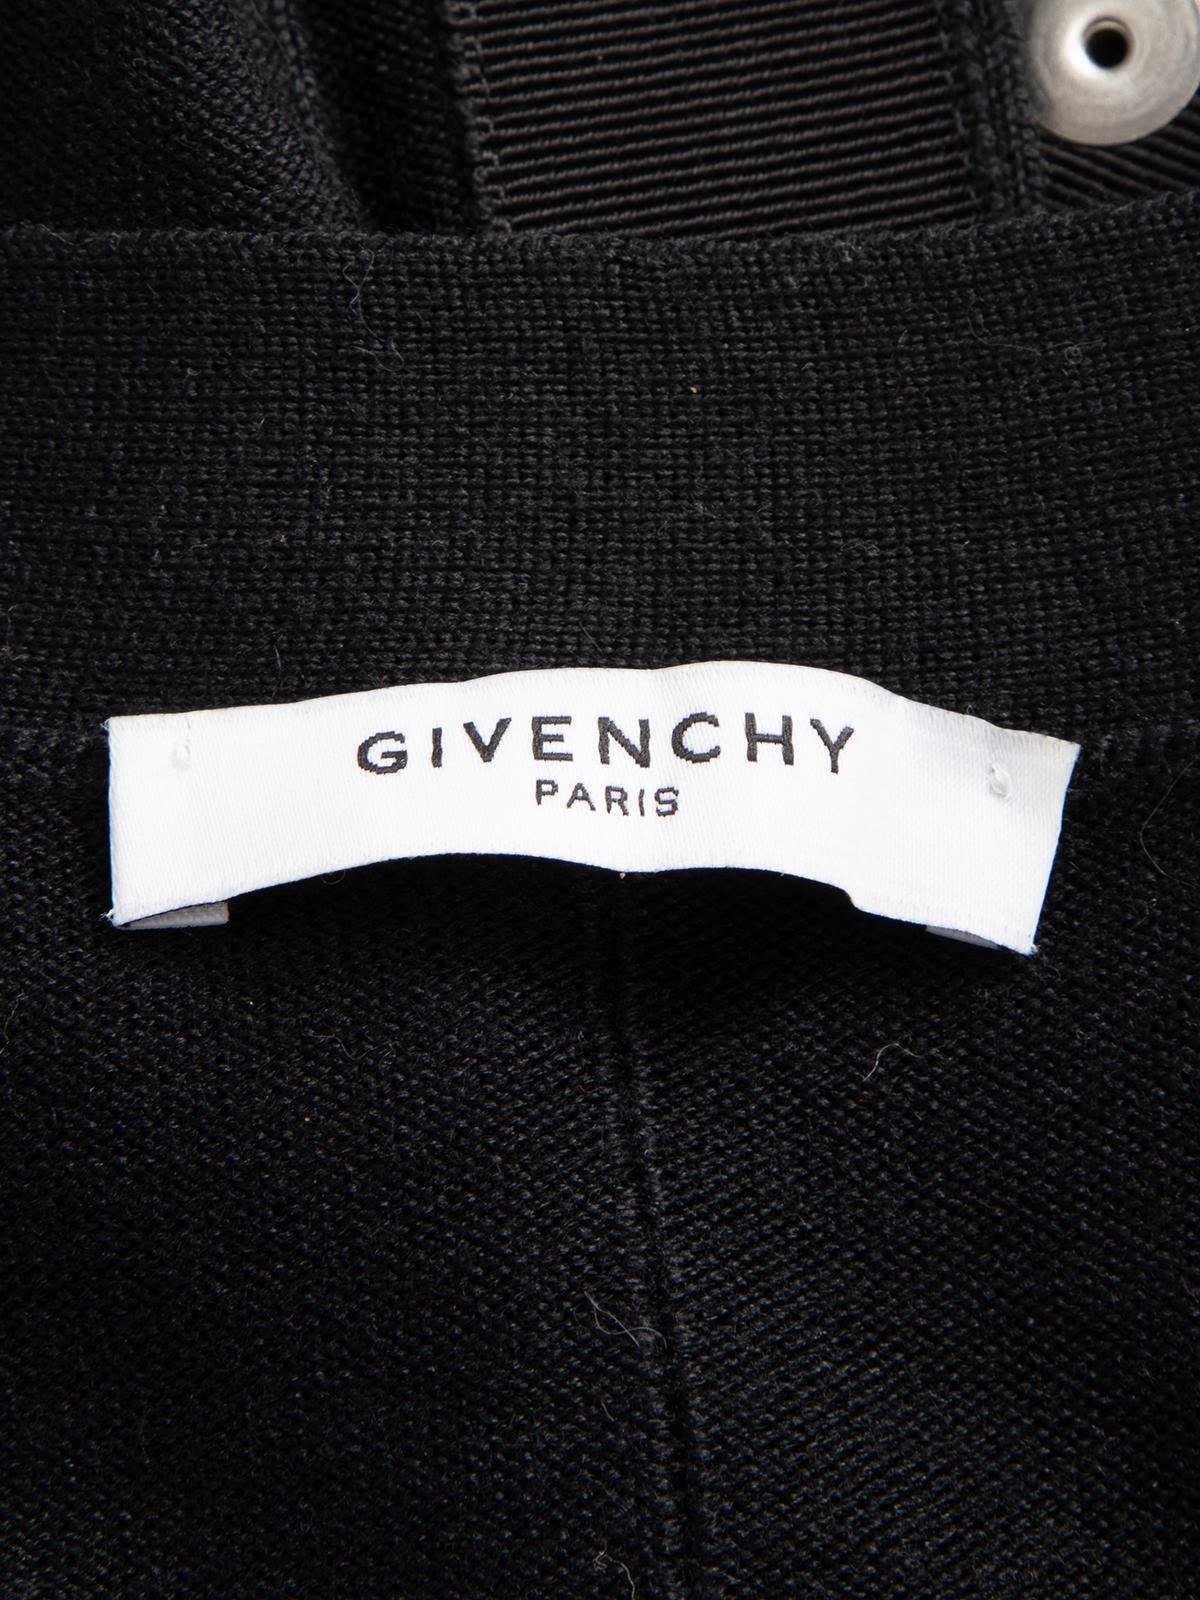 Pre-Loved Givenchy Women's Floral Longline Cardigan 2